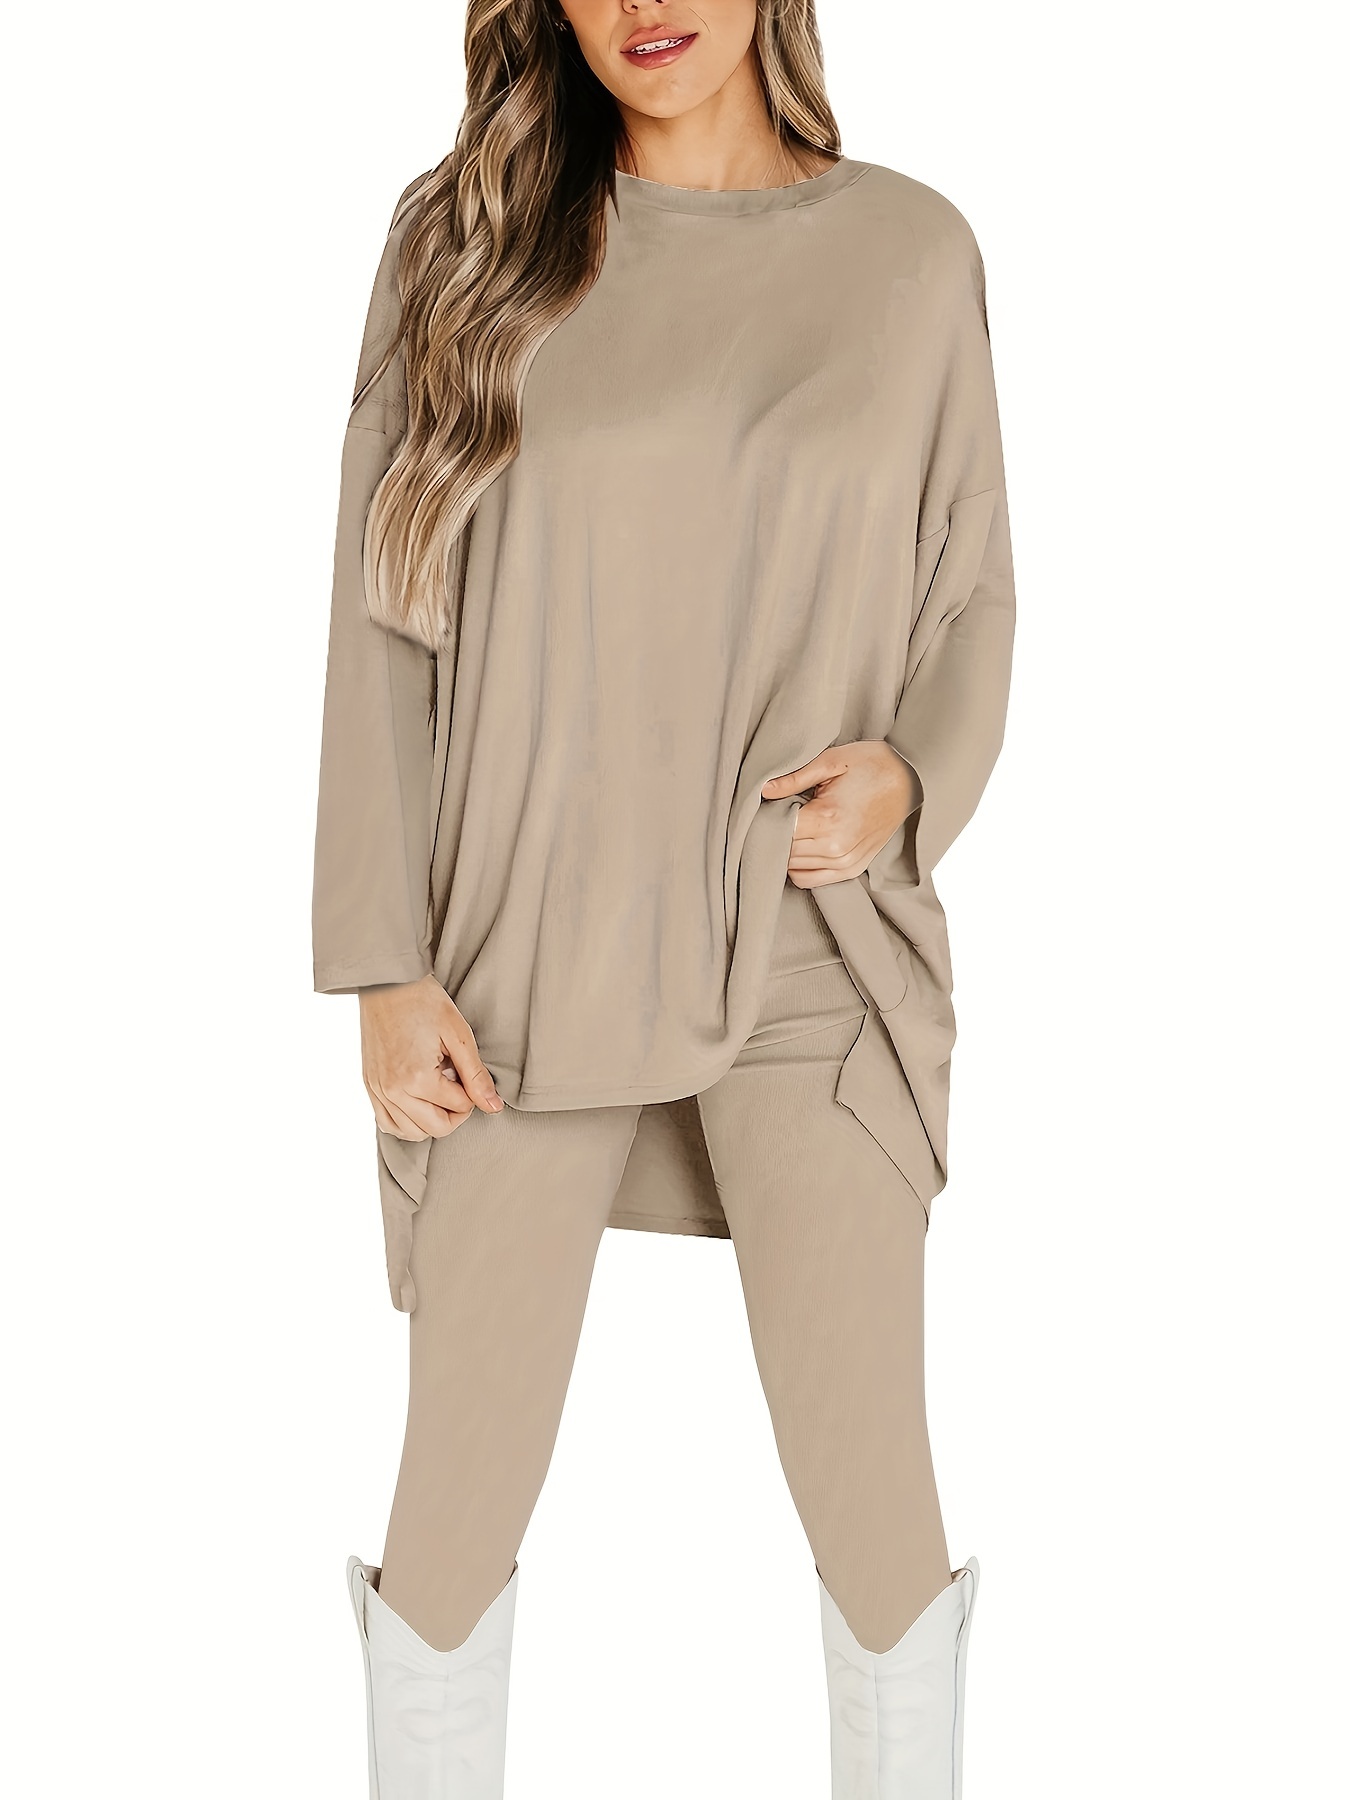 Plus Size Casual Outfits Set, Women's Plus Solid Ribbed Long Sleeve Round  Neck Top & Leggings Outfits Two Piece Set